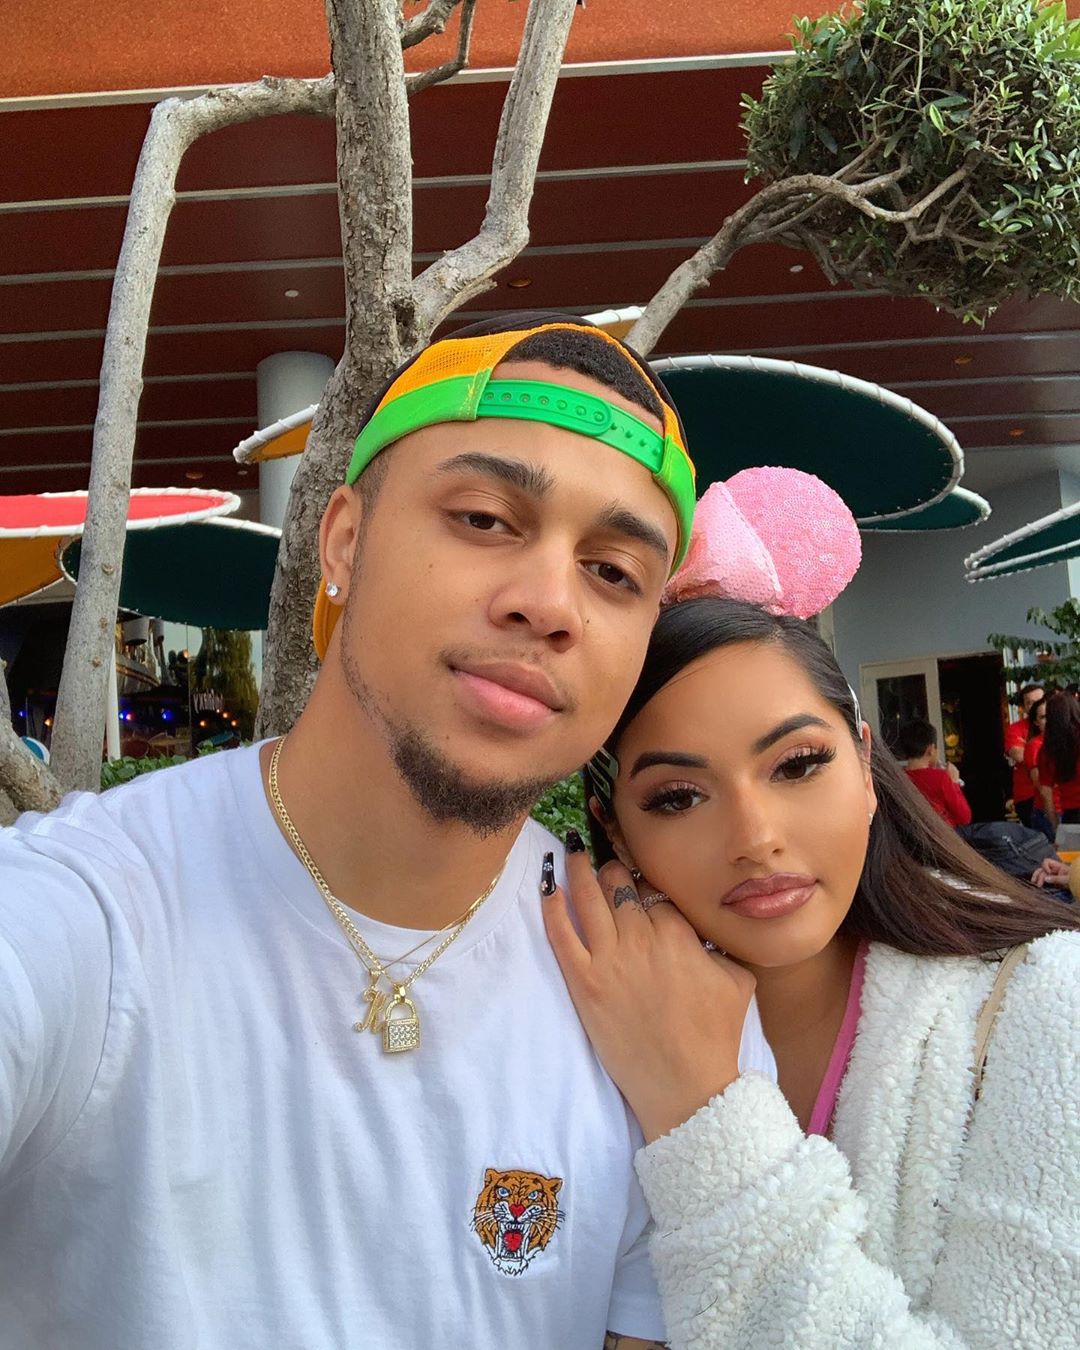 How Much Money KB and Karla Makes On YouTube – Net Worth